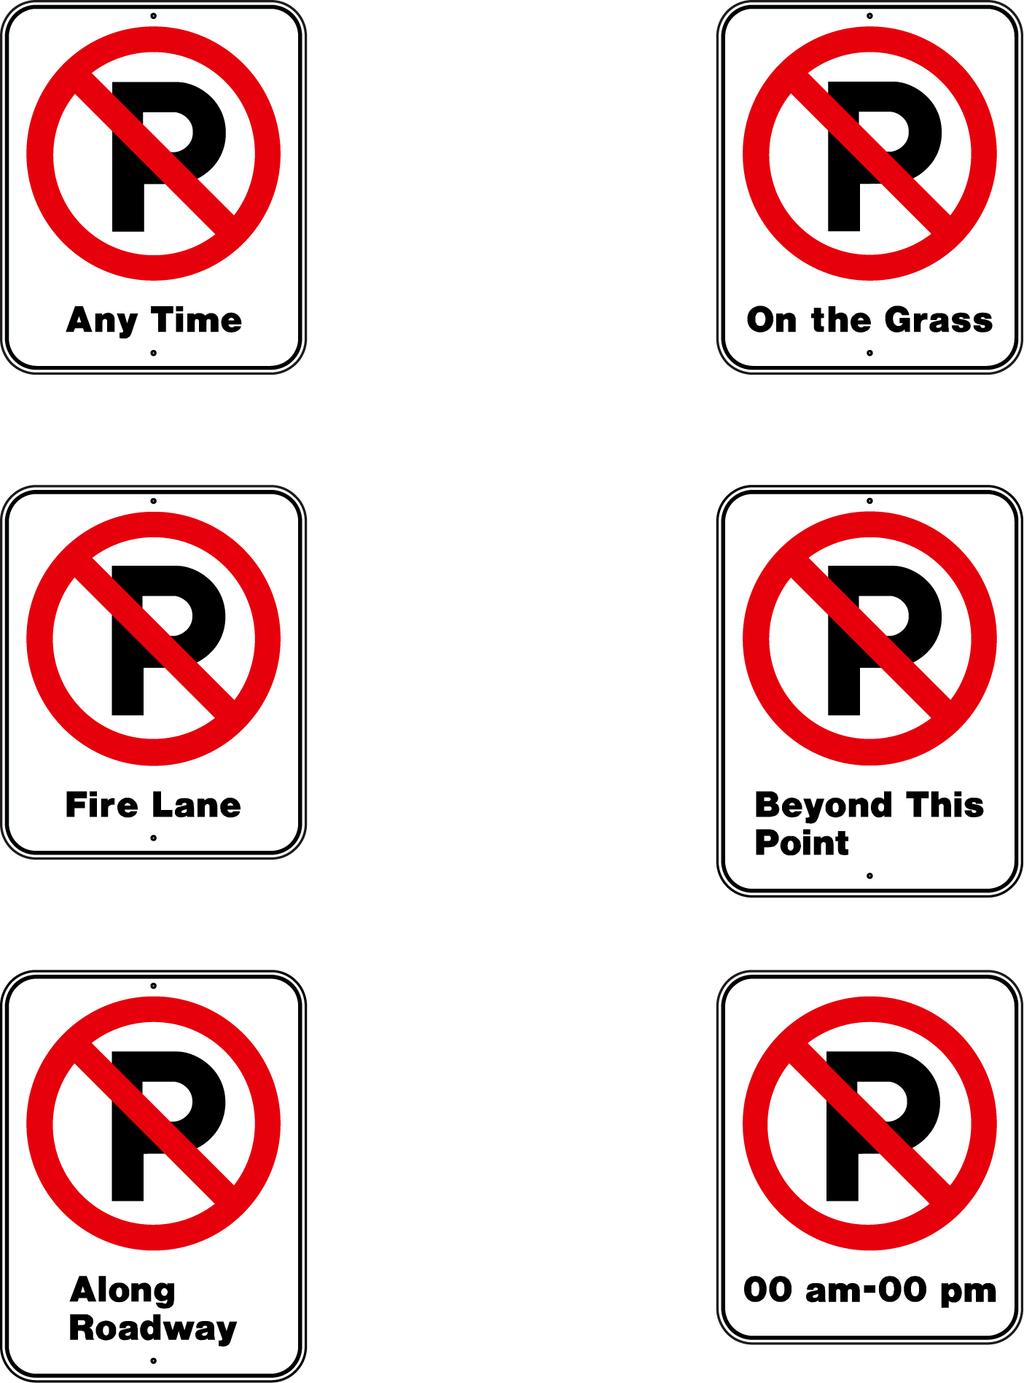 No Parking Sign Display Shown below are frequently requested No Parking signs. To order, use the sign identification code number to the left of each display along with the sign size.